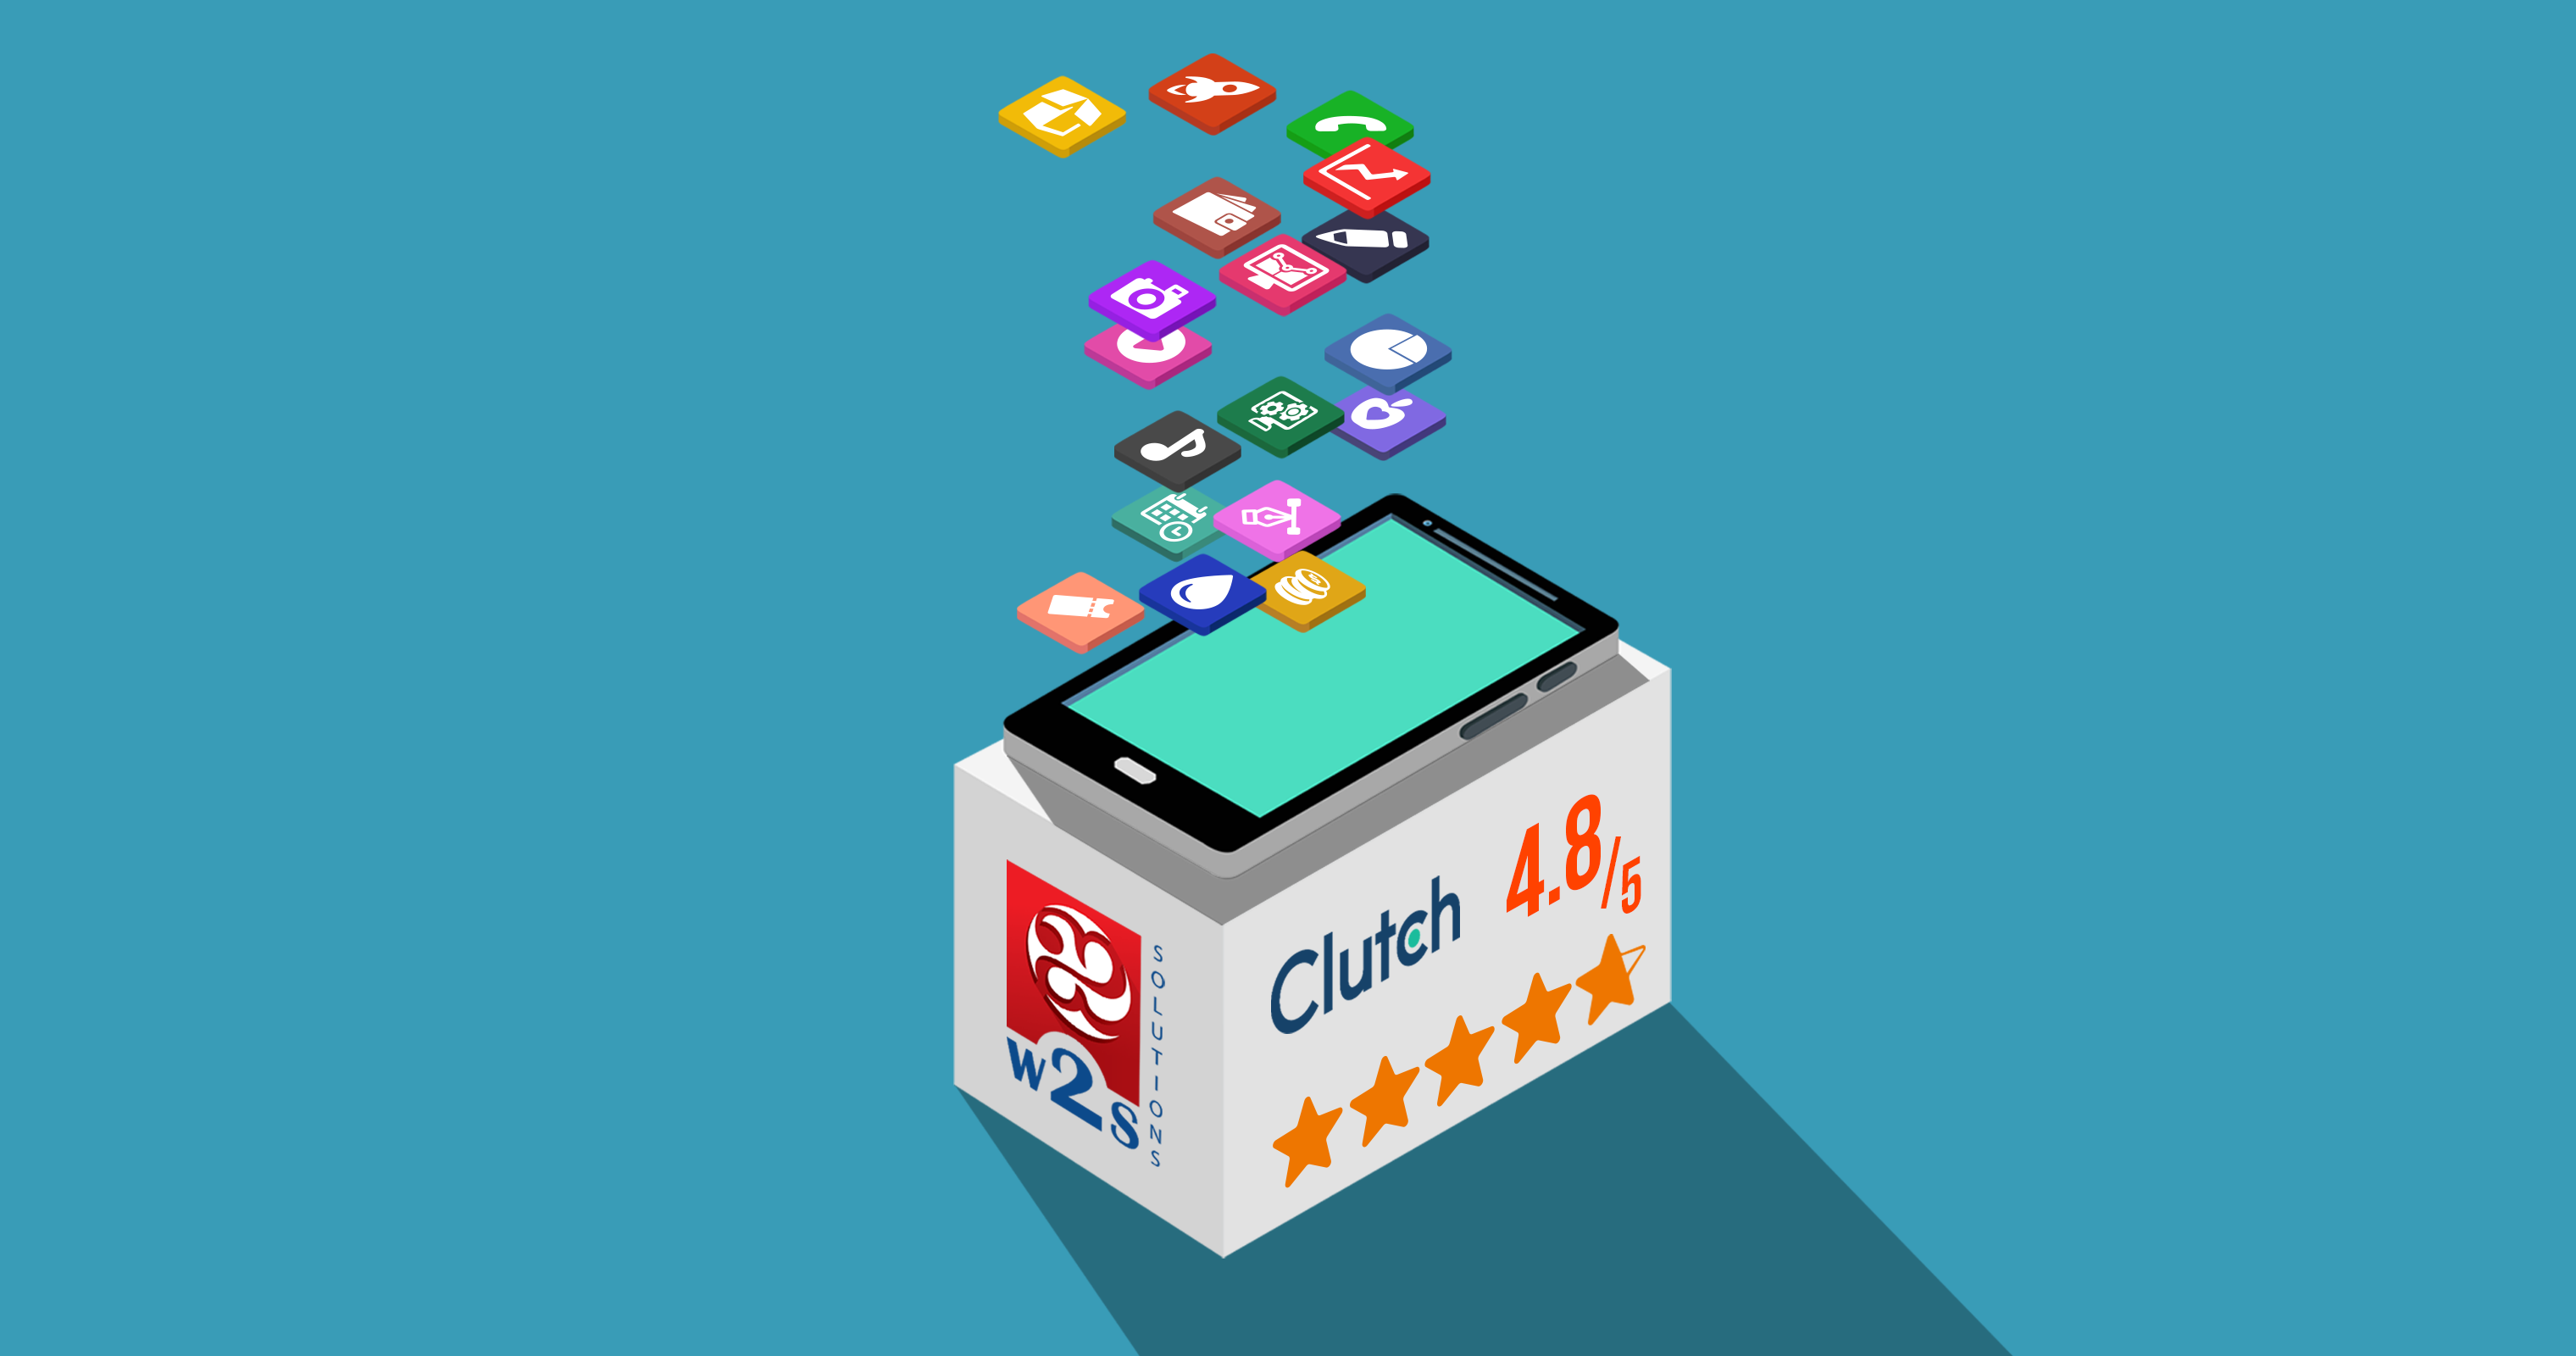 w2s mobile application Clutch review 4.8/5